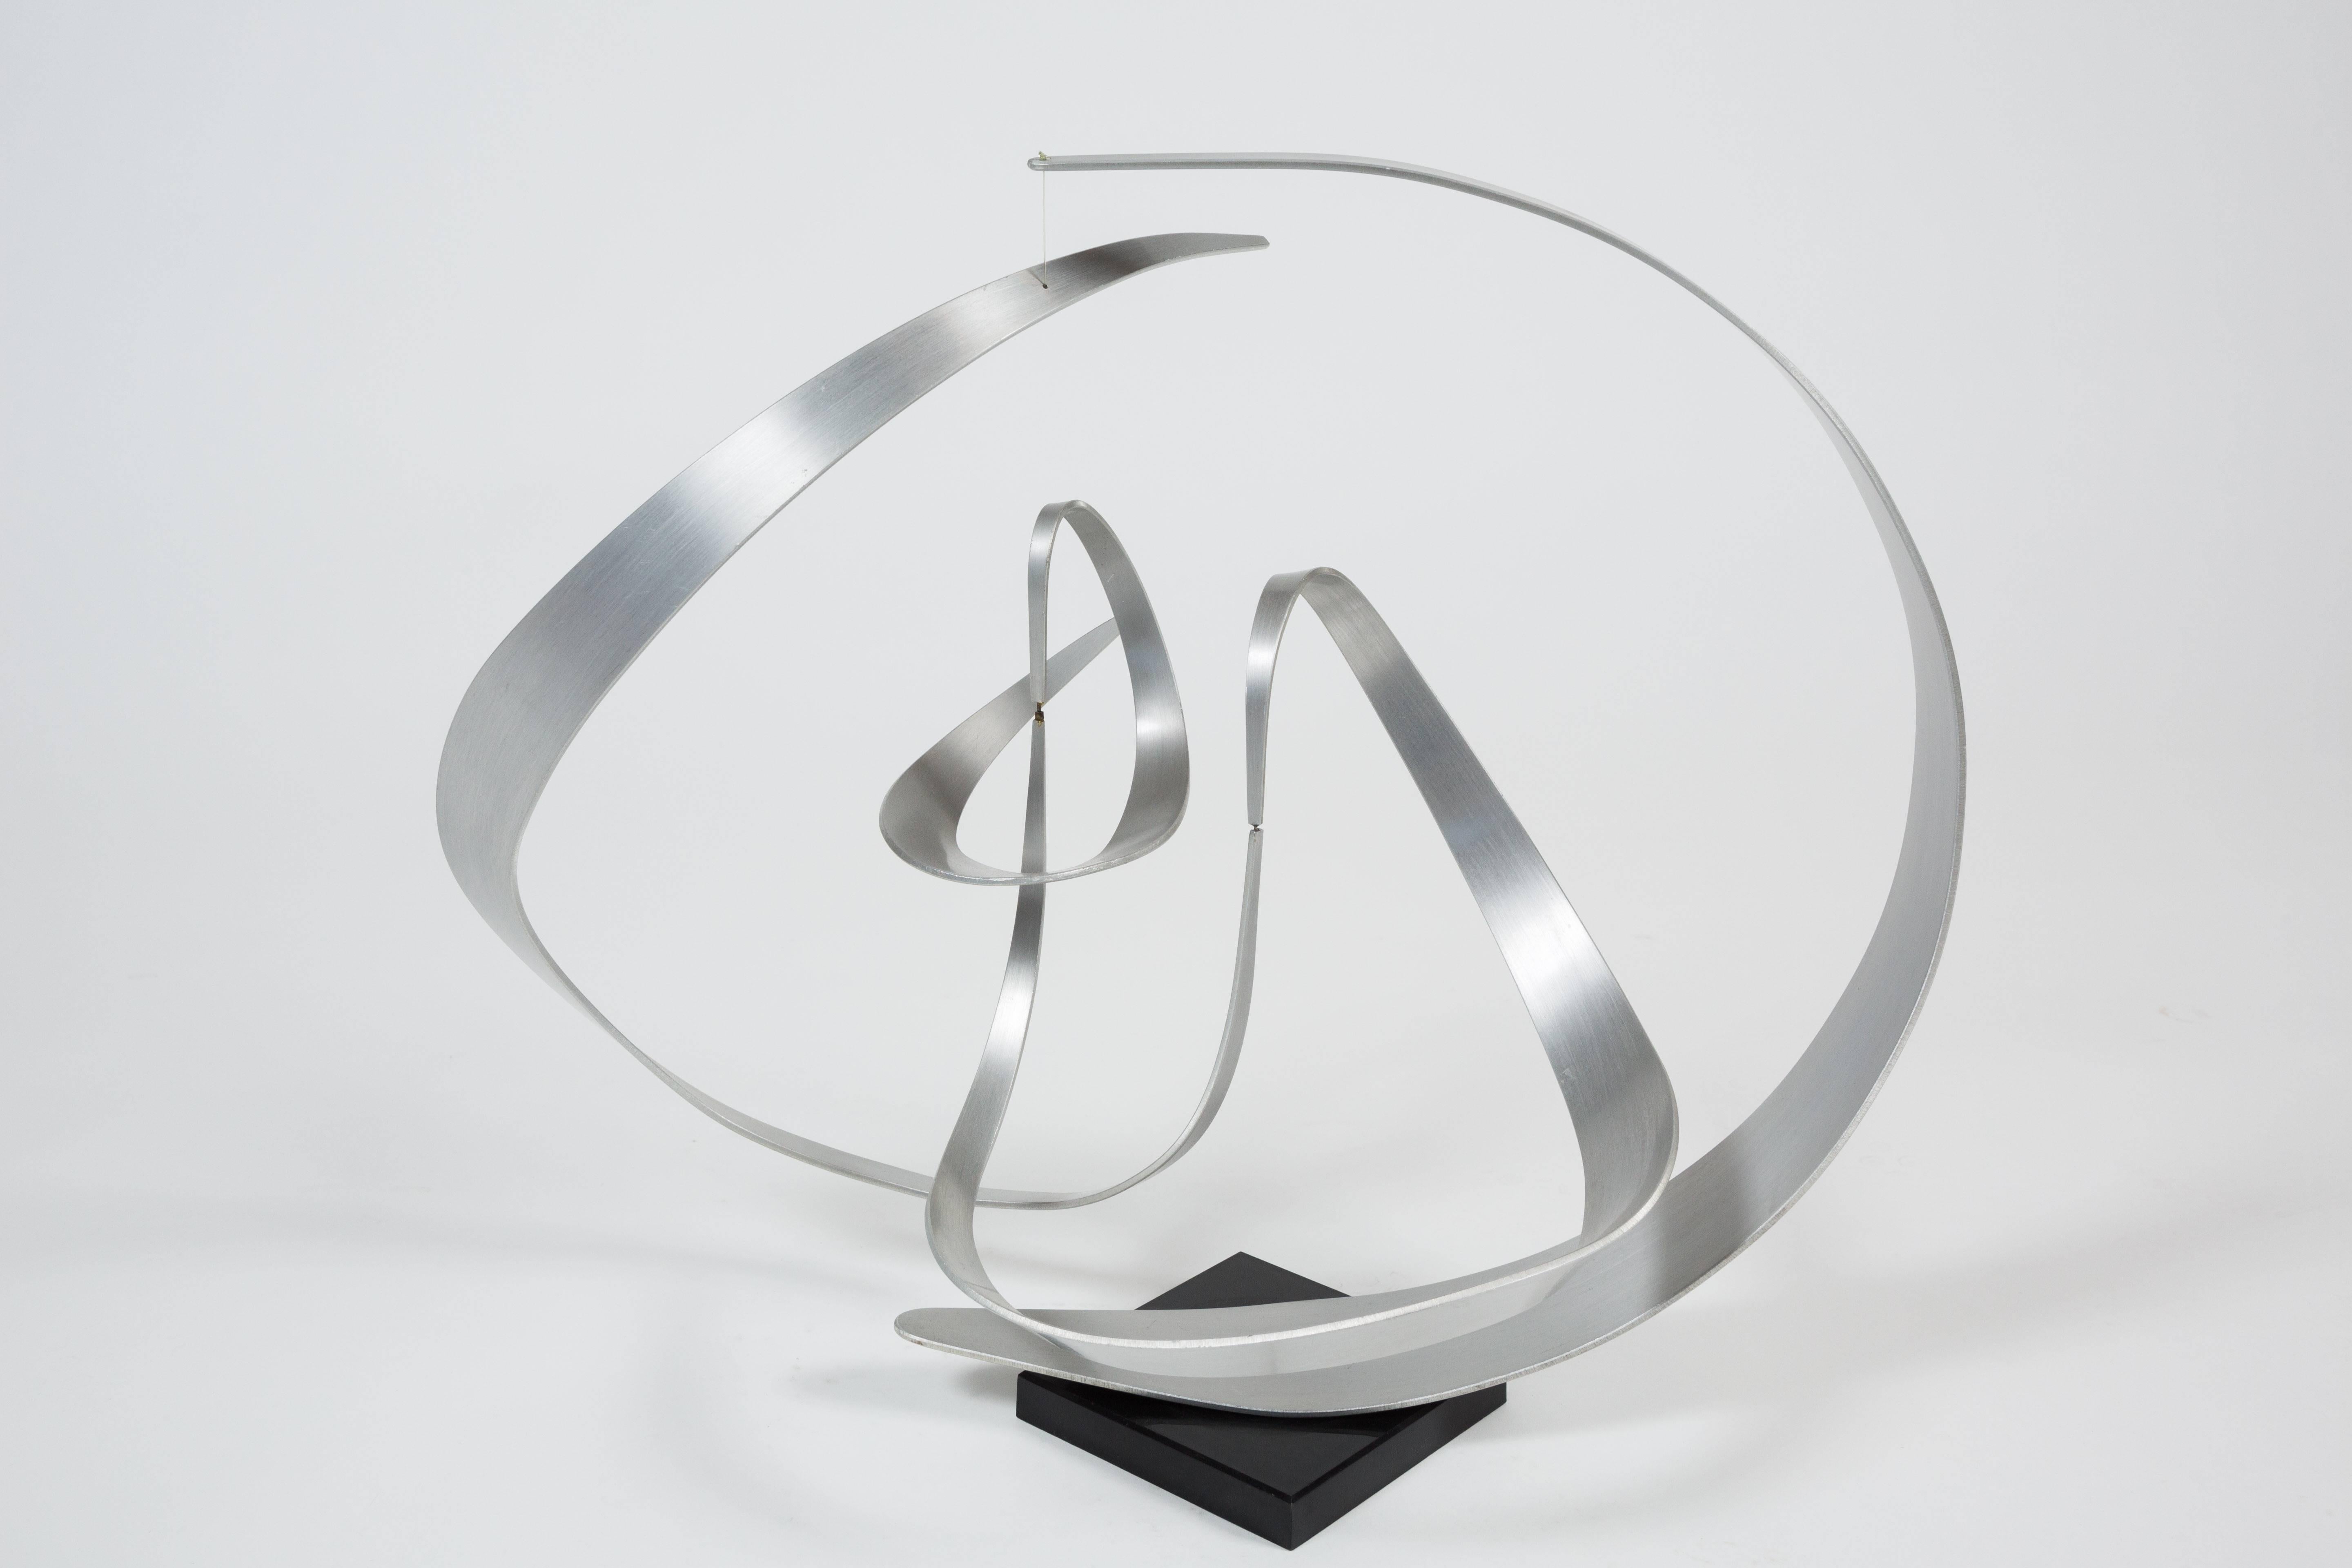 Aluminum Striking Kinetic Abstract Sculpture by John W. Anderson